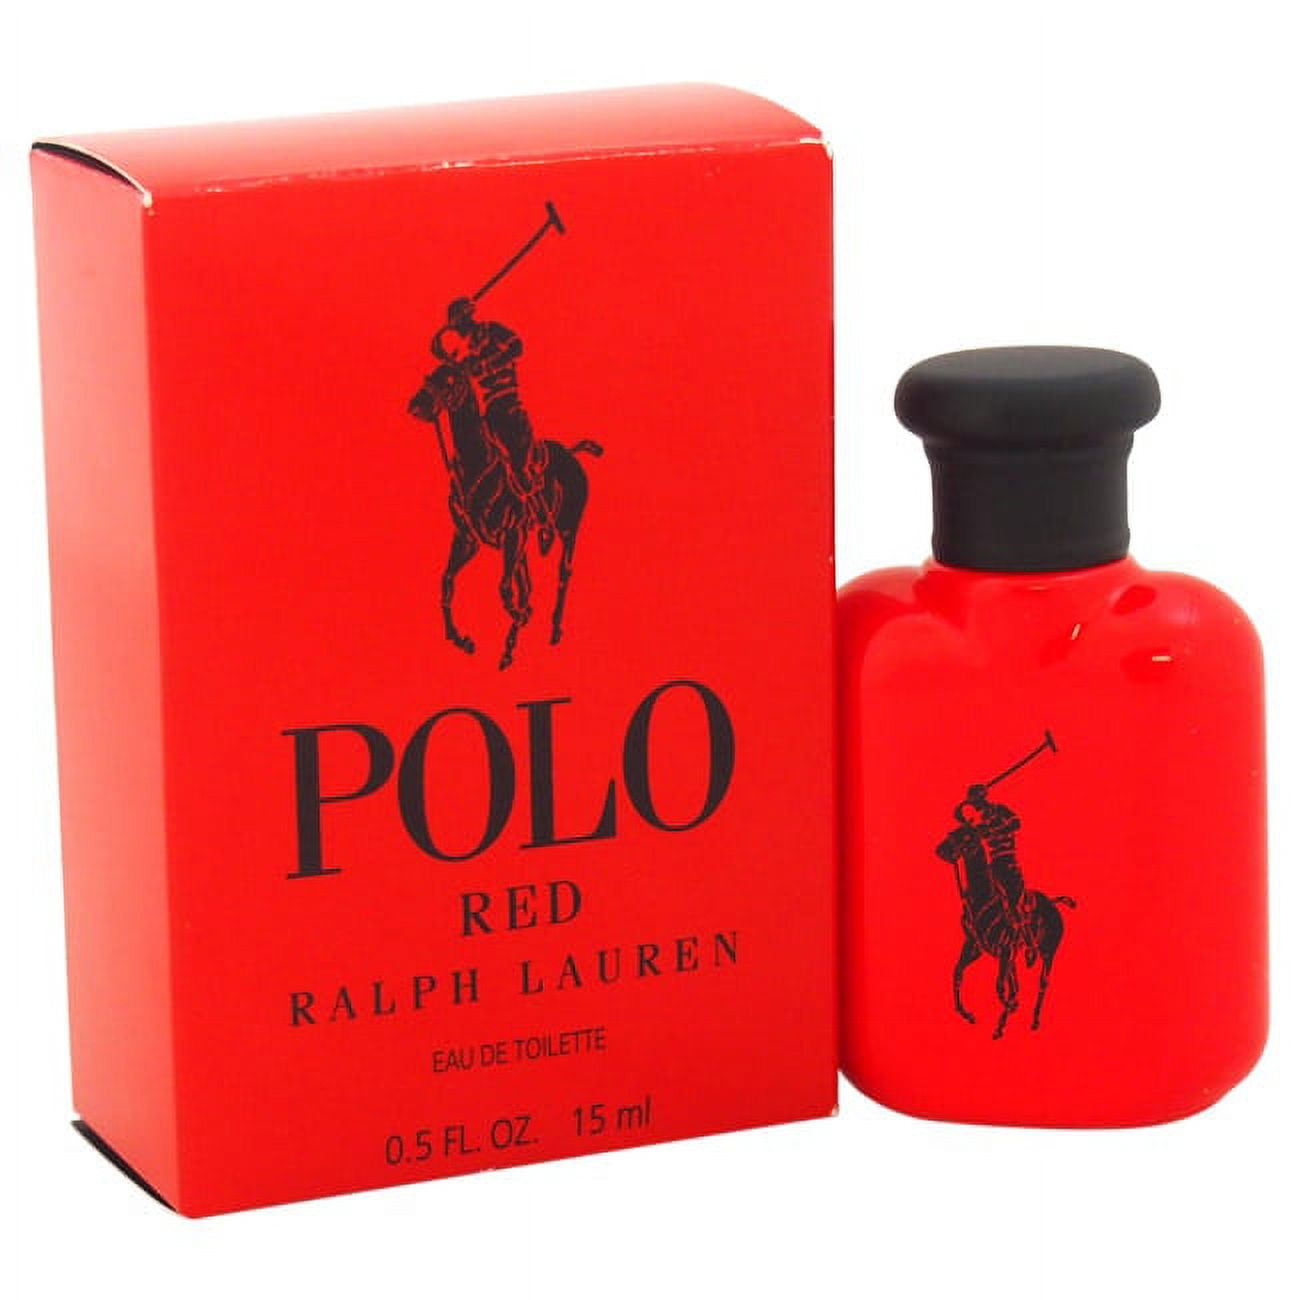  Ralph Lauren Fragrances Polo Red - Parfum - Men's Cologne -  Ambery & Woody - With Absinthe, Cedarwood, and Musk - Intense Fragrance -  4.2 Fl Oz : Beauty & Personal Care